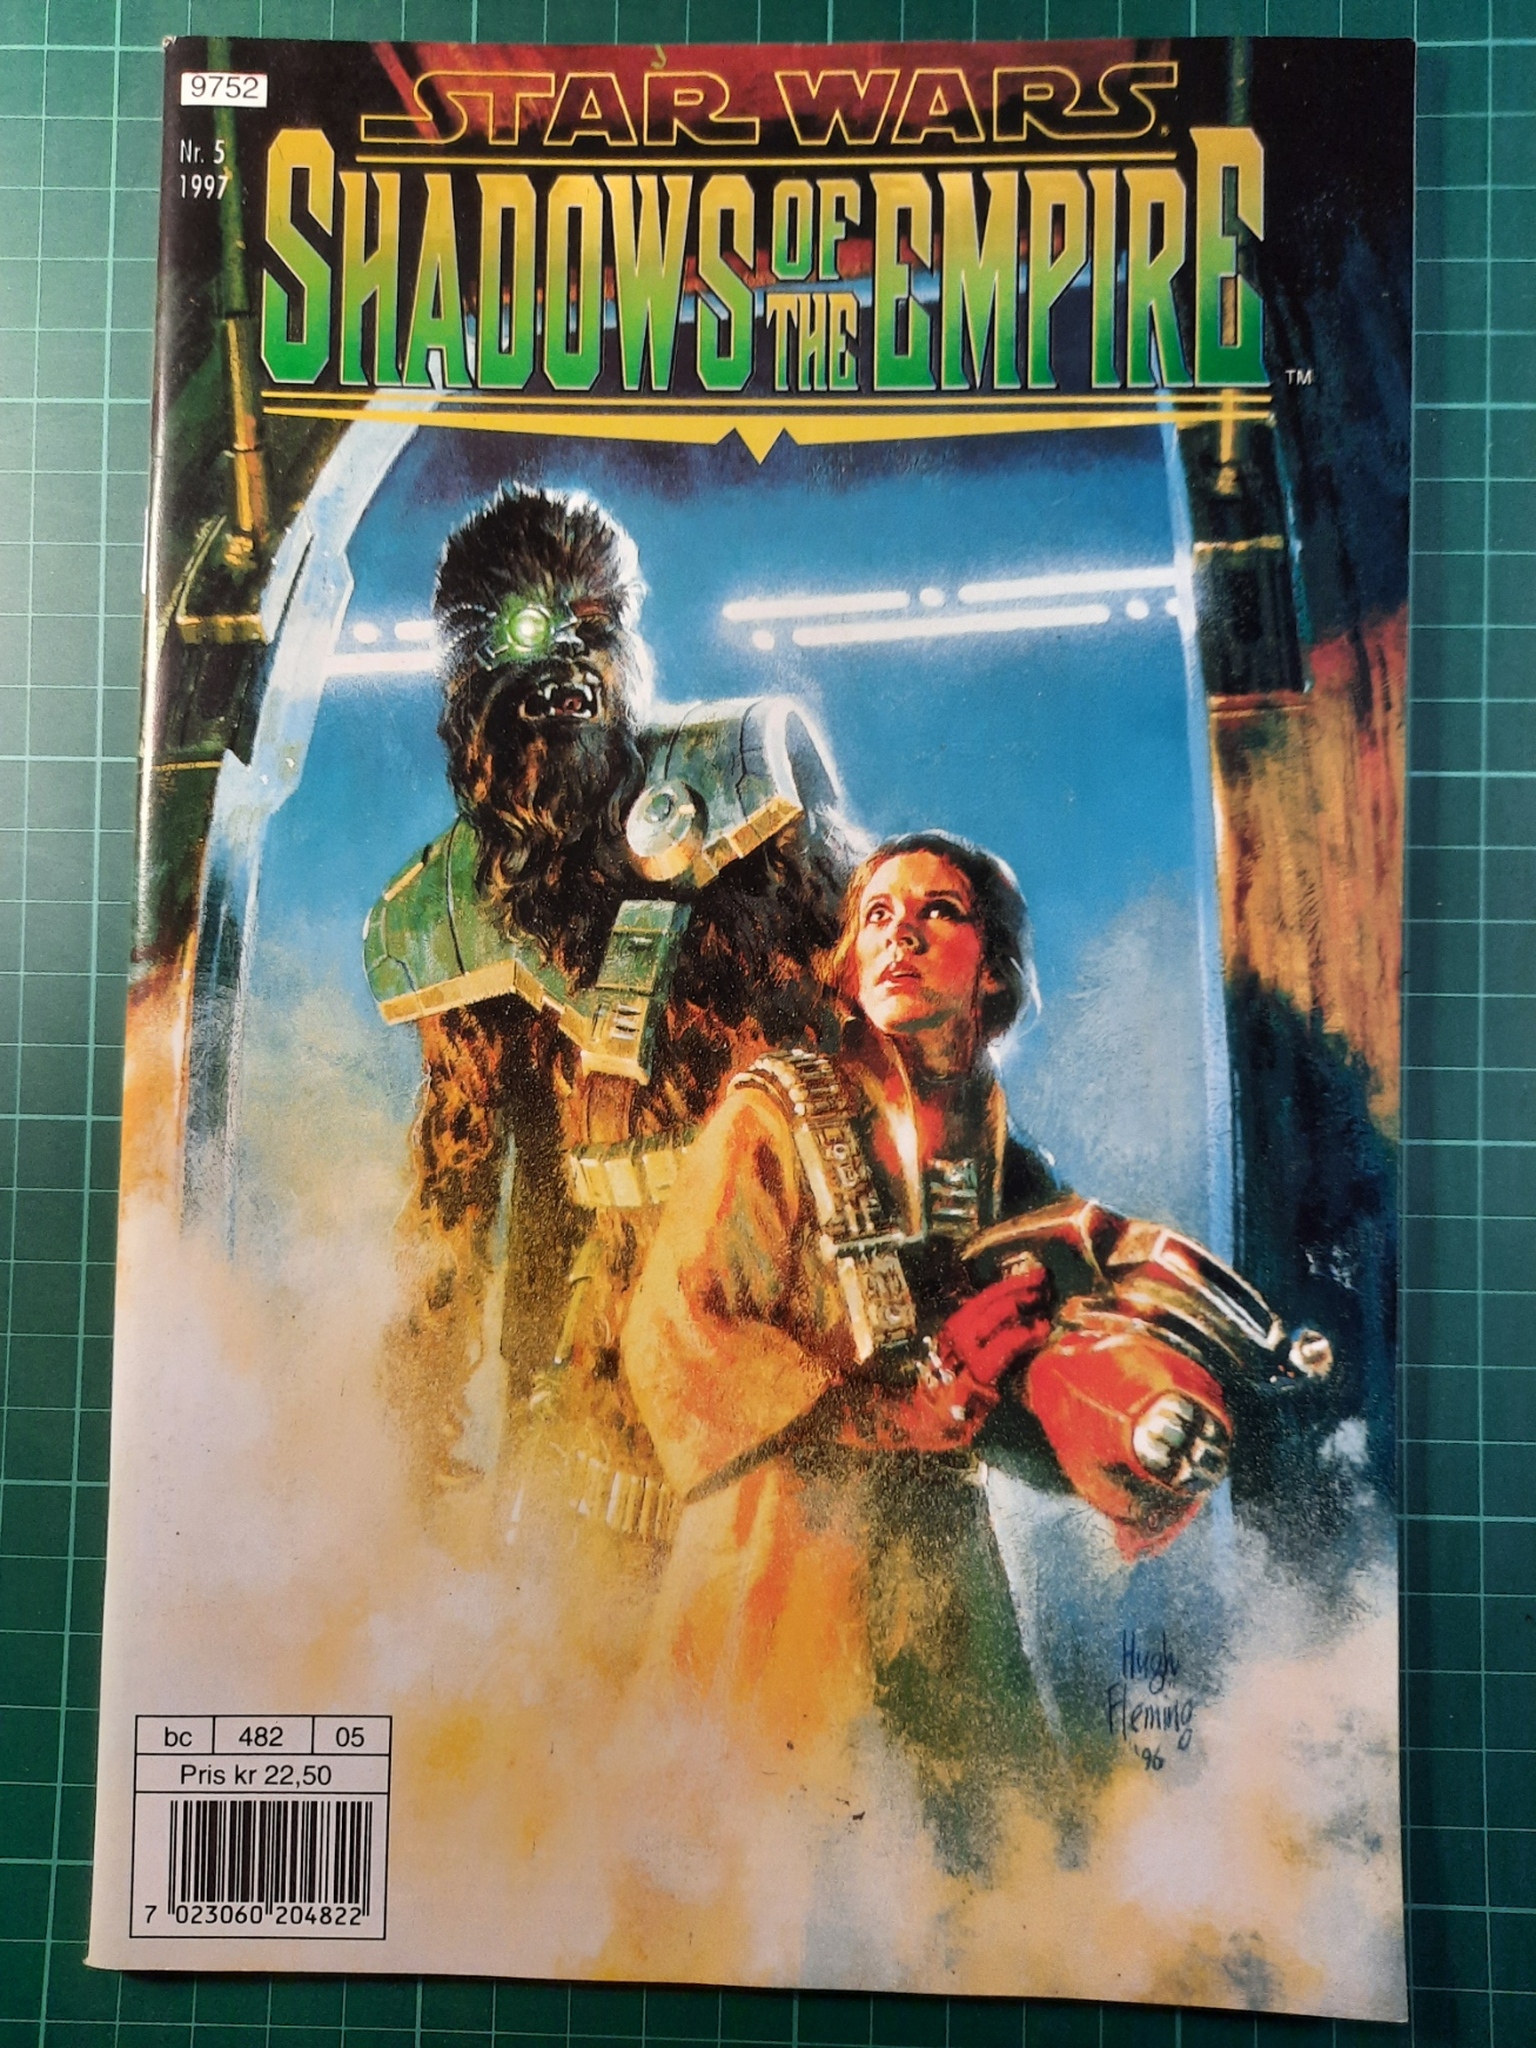 Star Wars Shadows of the empire 1997 - 05